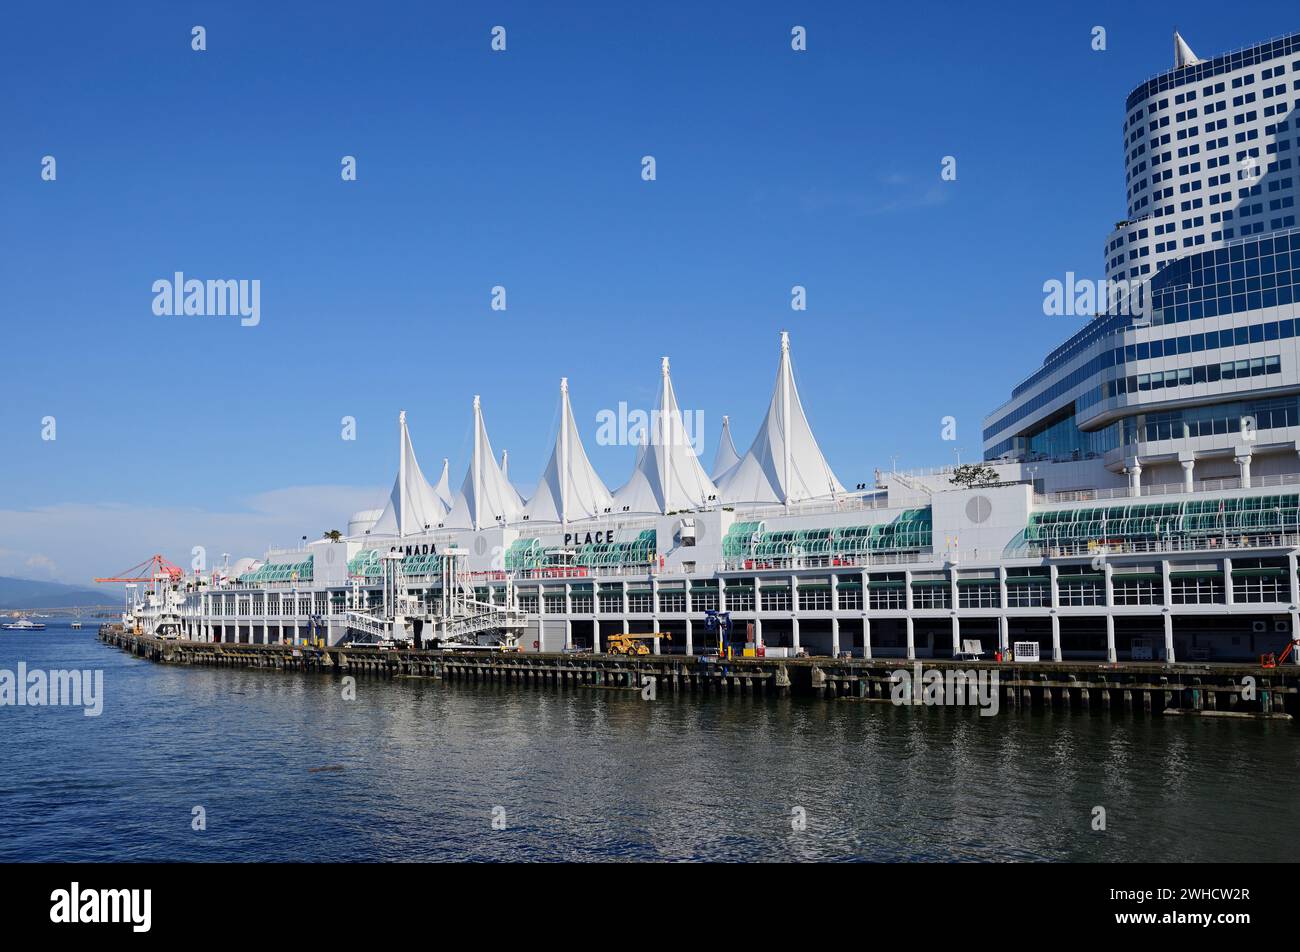 Canada Place on the shores of Burrard Inlet, Vancouver, British Columbia, Canada Stock Photo